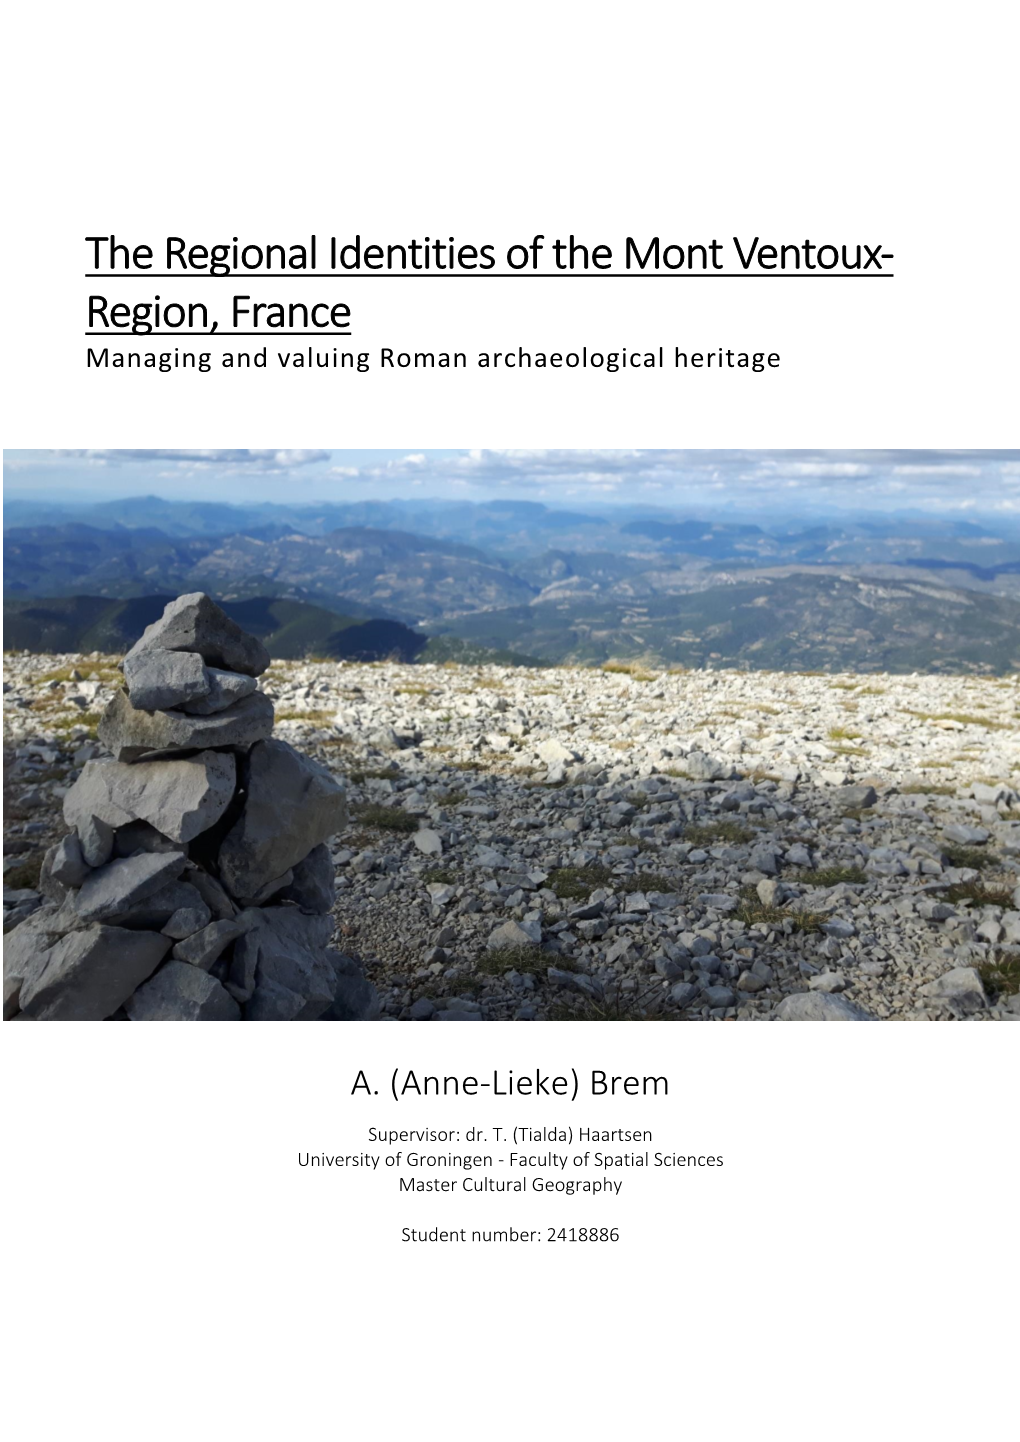 The Regional Identities of the Mont Ventoux- Region, France Managing and Valuing Roman Archaeological Heritage